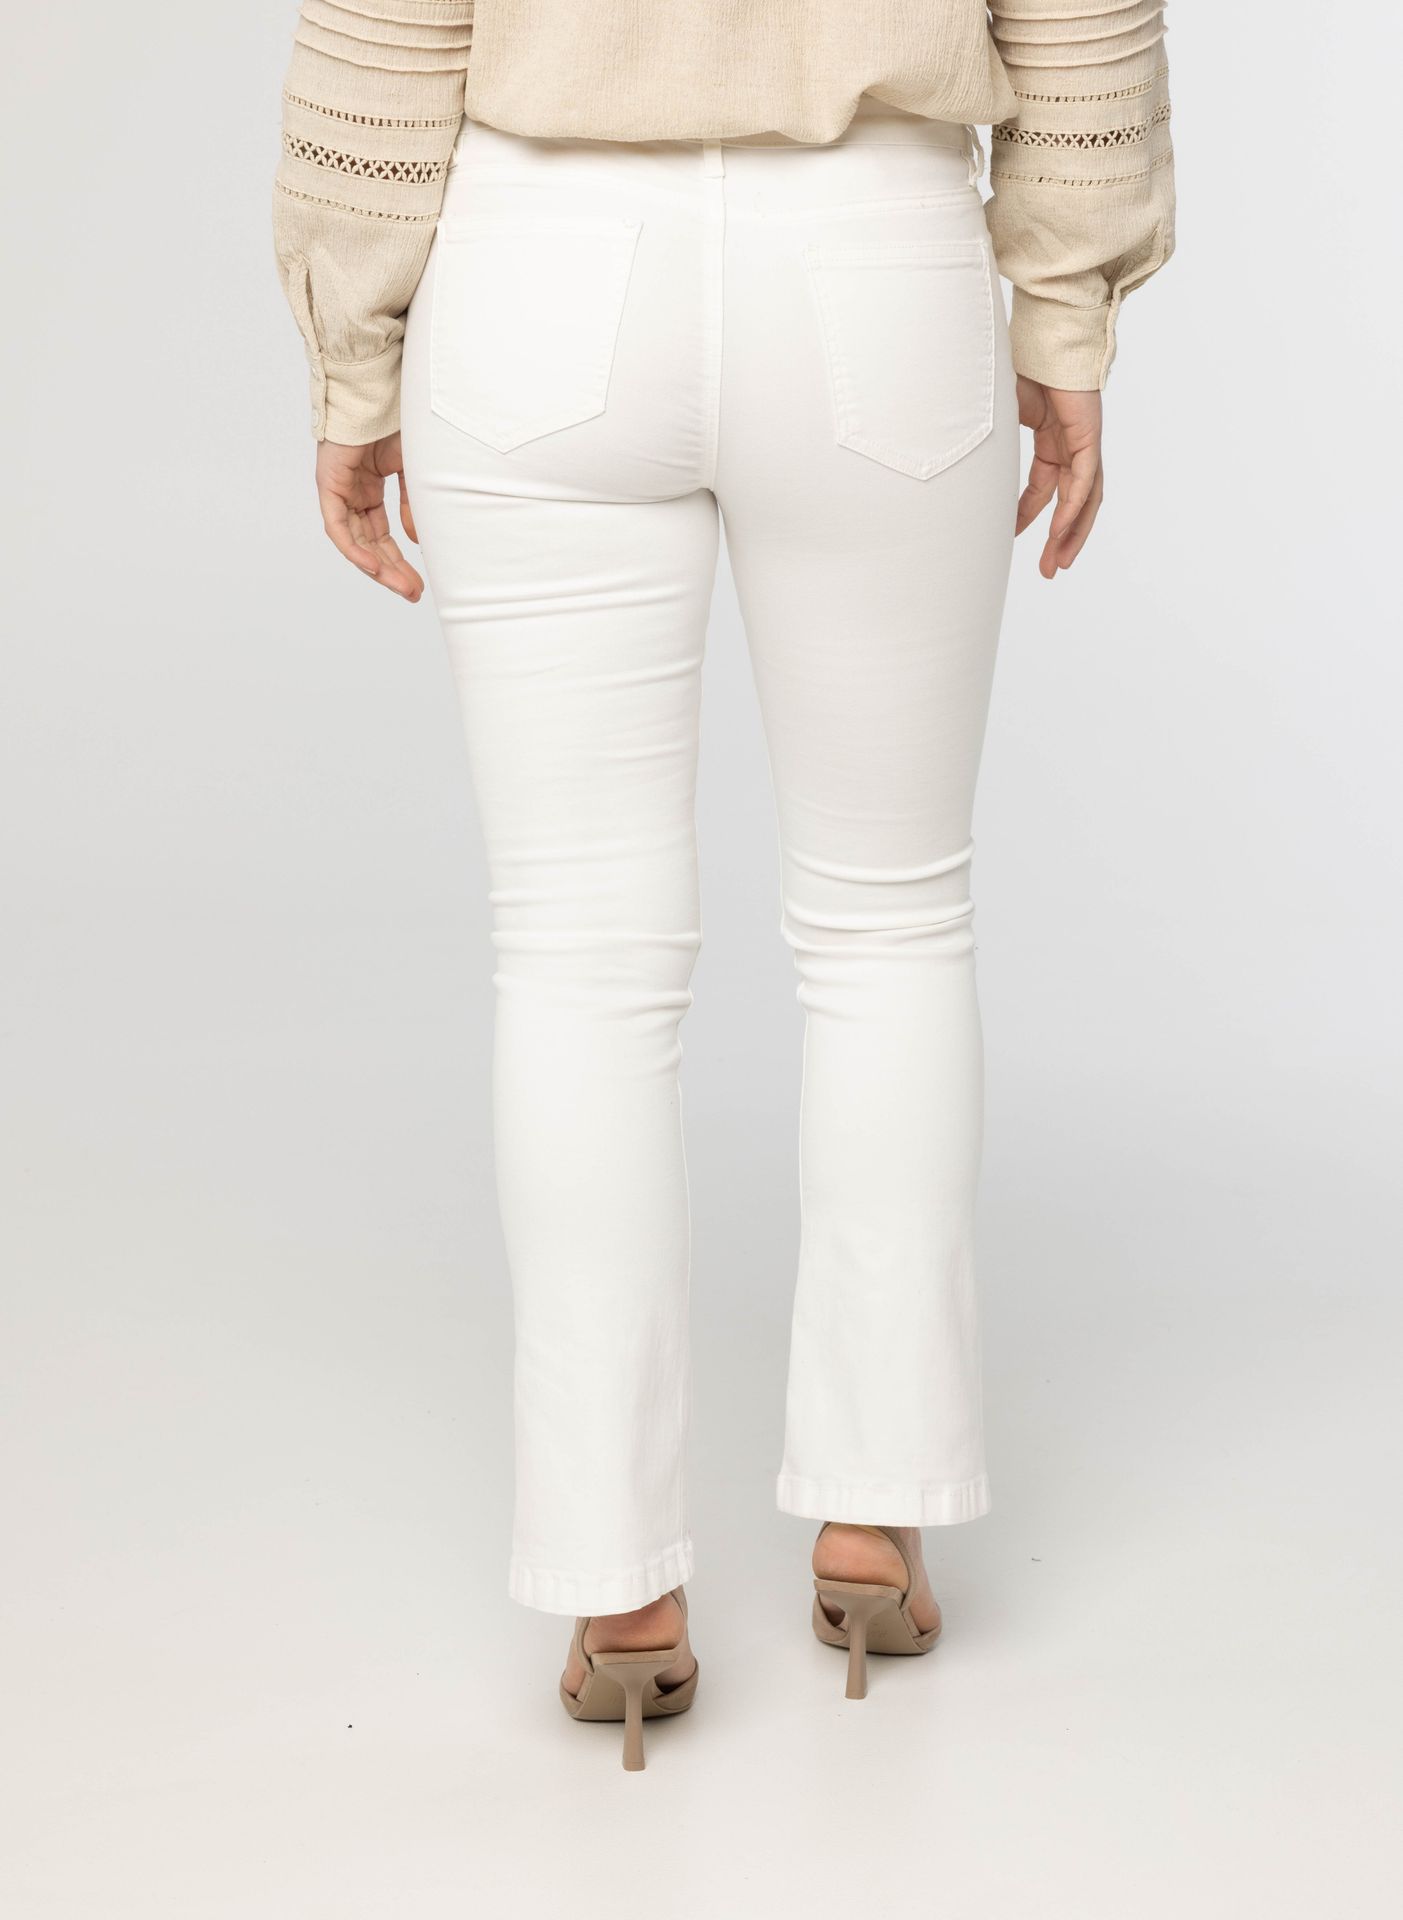 Norah Witte flared jeans white 212358-100-36